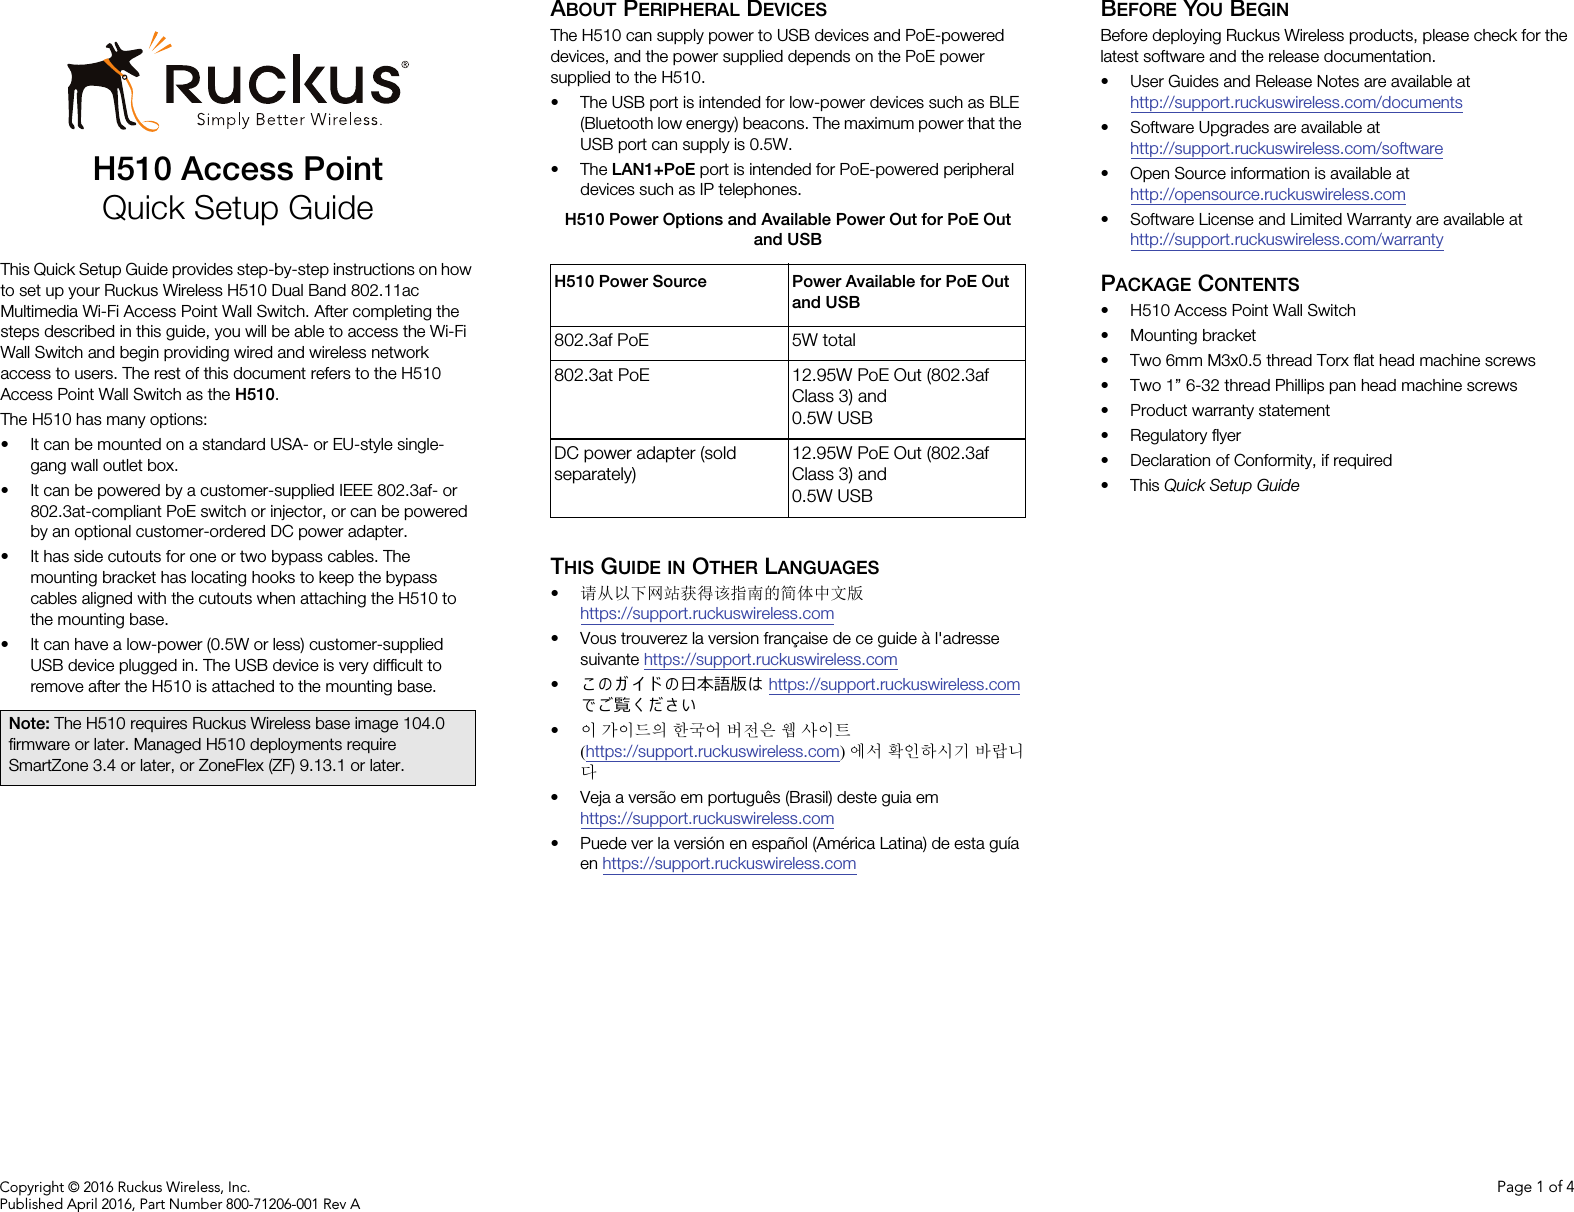 Copyright © 2016 Ruckus Wireless, Inc. Page 1 of 4Published April 2016, Part Number 800-71206-001 Rev AH510 Access PointQuick Setup GuideThis Quick Setup Guide provides step-by-step instructions on how to set up your Ruckus Wireless H510 Dual Band 802.11ac Multimedia Wi-Fi Access Point Wall Switch. After completing the steps described in this guide, you will be able to access the Wi-Fi Wall Switch and begin providing wired and wireless network access to users. The rest of this document refers to the H510 Access Point Wall Switch as the H510.The H510 has many options: • It can be mounted on a standard USA- or EU-style single-gang wall outlet box.• It can be powered by a customer-supplied IEEE 802.3af- or 802.3at-compliant PoE switch or injector, or can be powered by an optional customer-ordered DC power adapter.• It has side cutouts for one or two bypass cables. The mounting bracket has locating hooks to keep the bypass cables aligned with the cutouts when attaching the H510 to the mounting base.• It can have a low-power (0.5W or less) customer-supplied USB device plugged in. The USB device is very difficult to remove after the H510 is attached to the mounting base.ABOUT PERIPHERAL DEVICESThe H510 can supply power to USB devices and PoE-powered devices, and the power supplied depends on the PoE power supplied to the H510.• The USB port is intended for low-power devices such as BLE (Bluetooth low energy) beacons. The maximum power that the USB port can supply is 0.5W. •The LAN1+PoE port is intended for PoE-powered peripheral devices such as IP telephones.THIS GUIDE IN OTHER LANGUAGES•请从以下网站获得该指南的简体中文版 https://support.ruckuswireless.com• Vous trouverez la version française de ce guide à l&apos;adresse suivante https://support.ruckuswireless.com•こ の ガ イ ド の⽇本語版は https://support.ruckuswireless.com でご覧く ださい•이 가이드의 한국어 버전은 웹 사이트(https://support.ruckuswireless.com)에서 확인하시기 바랍니다• Veja a versão em português (Brasil) deste guia em https://support.ruckuswireless.com• Puede ver la versión en español (América Latina) de esta guía en https://support.ruckuswireless.comBEFORE YOU BEGINBefore deploying Ruckus Wireless products, please check for the latest software and the release documentation.• User Guides and Release Notes are available at http://support.ruckuswireless.com/documents• Software Upgrades are available athttp://support.ruckuswireless.com/software• Open Source information is available athttp://opensource.ruckuswireless.com• Software License and Limited Warranty are available at http://support.ruckuswireless.com/warrantyPACKAGE CONTENTS• H510 Access Point Wall Switch• Mounting bracket• Two 6mm M3x0.5 thread Torx flat head machine screws• Two 1” 6-32 thread Phillips pan head machine screws• Product warranty statement• Regulatory flyer• Declaration of Conformity, if required•This Quick Setup GuideNote: The H510 requires Ruckus Wireless base image 104.0 firmware or later. Managed H510 deployments require SmartZone 3.4 or later, or ZoneFlex (ZF) 9.13.1 or later.H510 Power Options and Available Power Out for PoE Out and USBH510 Power Source Power Available for PoE Out and USB802.3af PoE 5W total802.3at PoE 12.95W PoE Out (802.3af Class 3) and 0.5W USBDC power adapter (sold separately)12.95W PoE Out (802.3af Class 3) and 0.5W USB